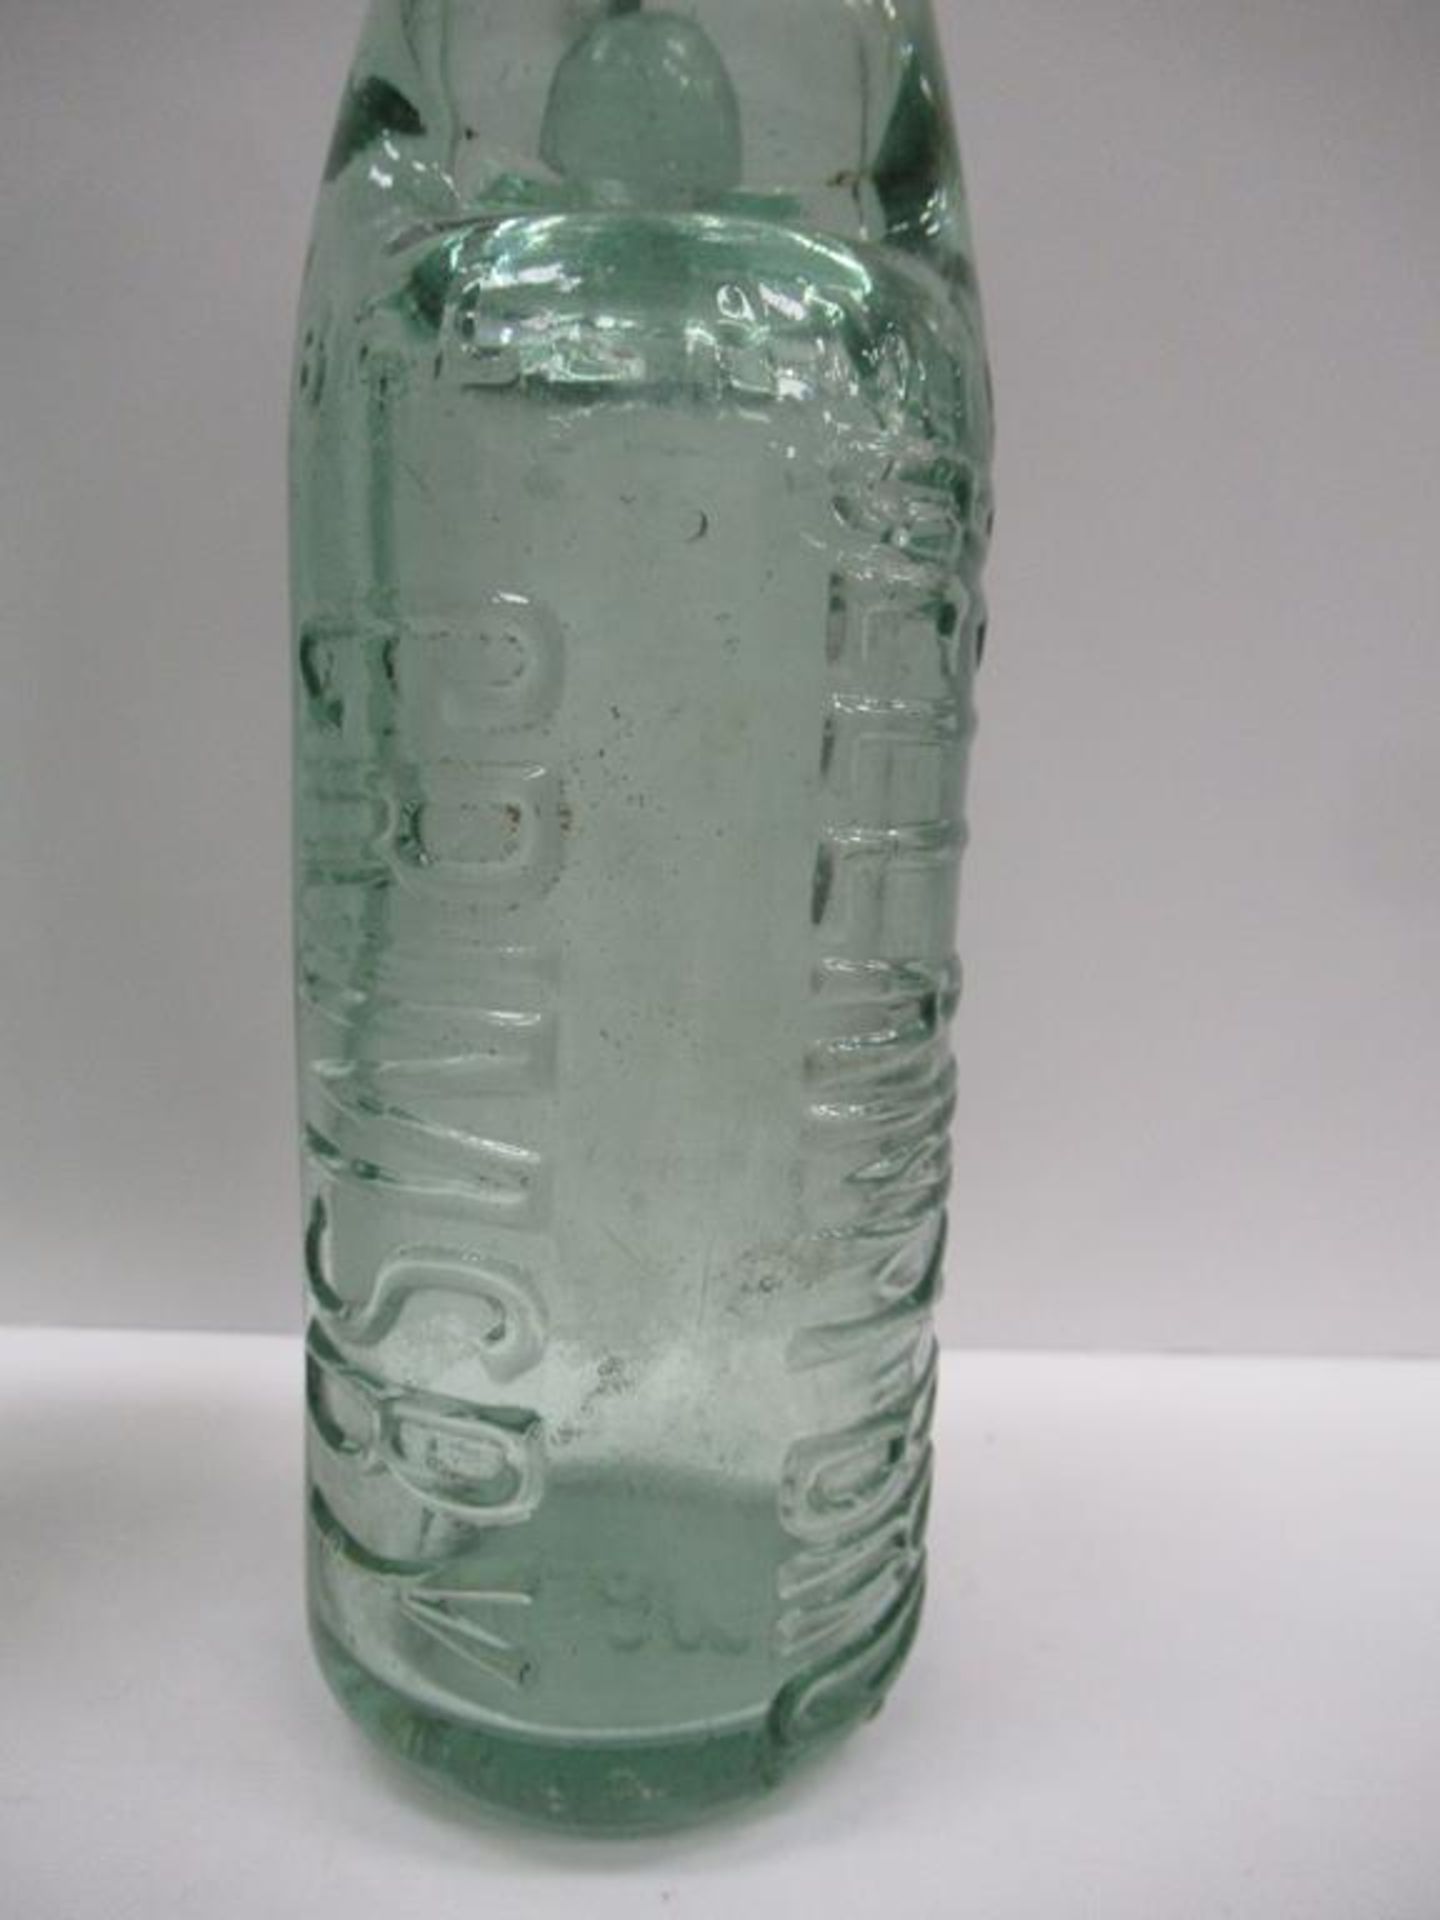 7x Grimsby (3x Grimsby & Louth) Bellamy Bro's Codd bottles - Image 6 of 23